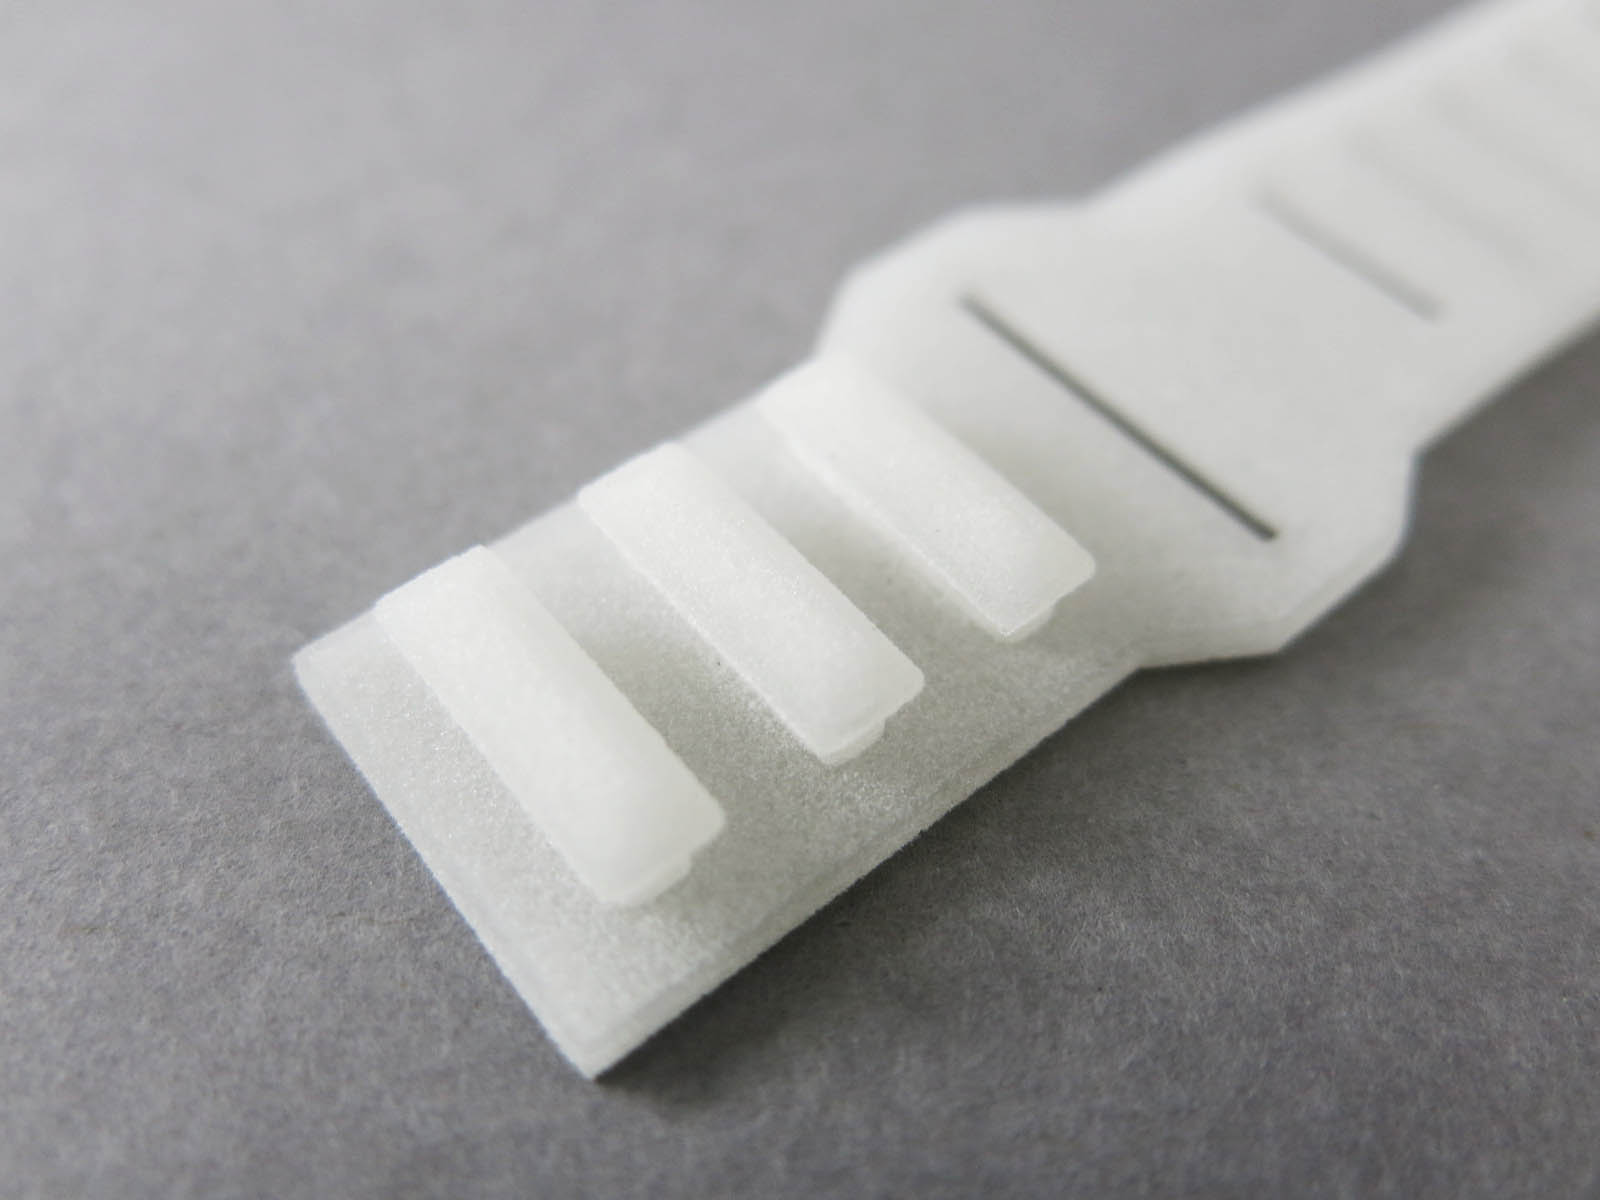  A flexible part 3D printed by Sculpteo in the new PEBA material 